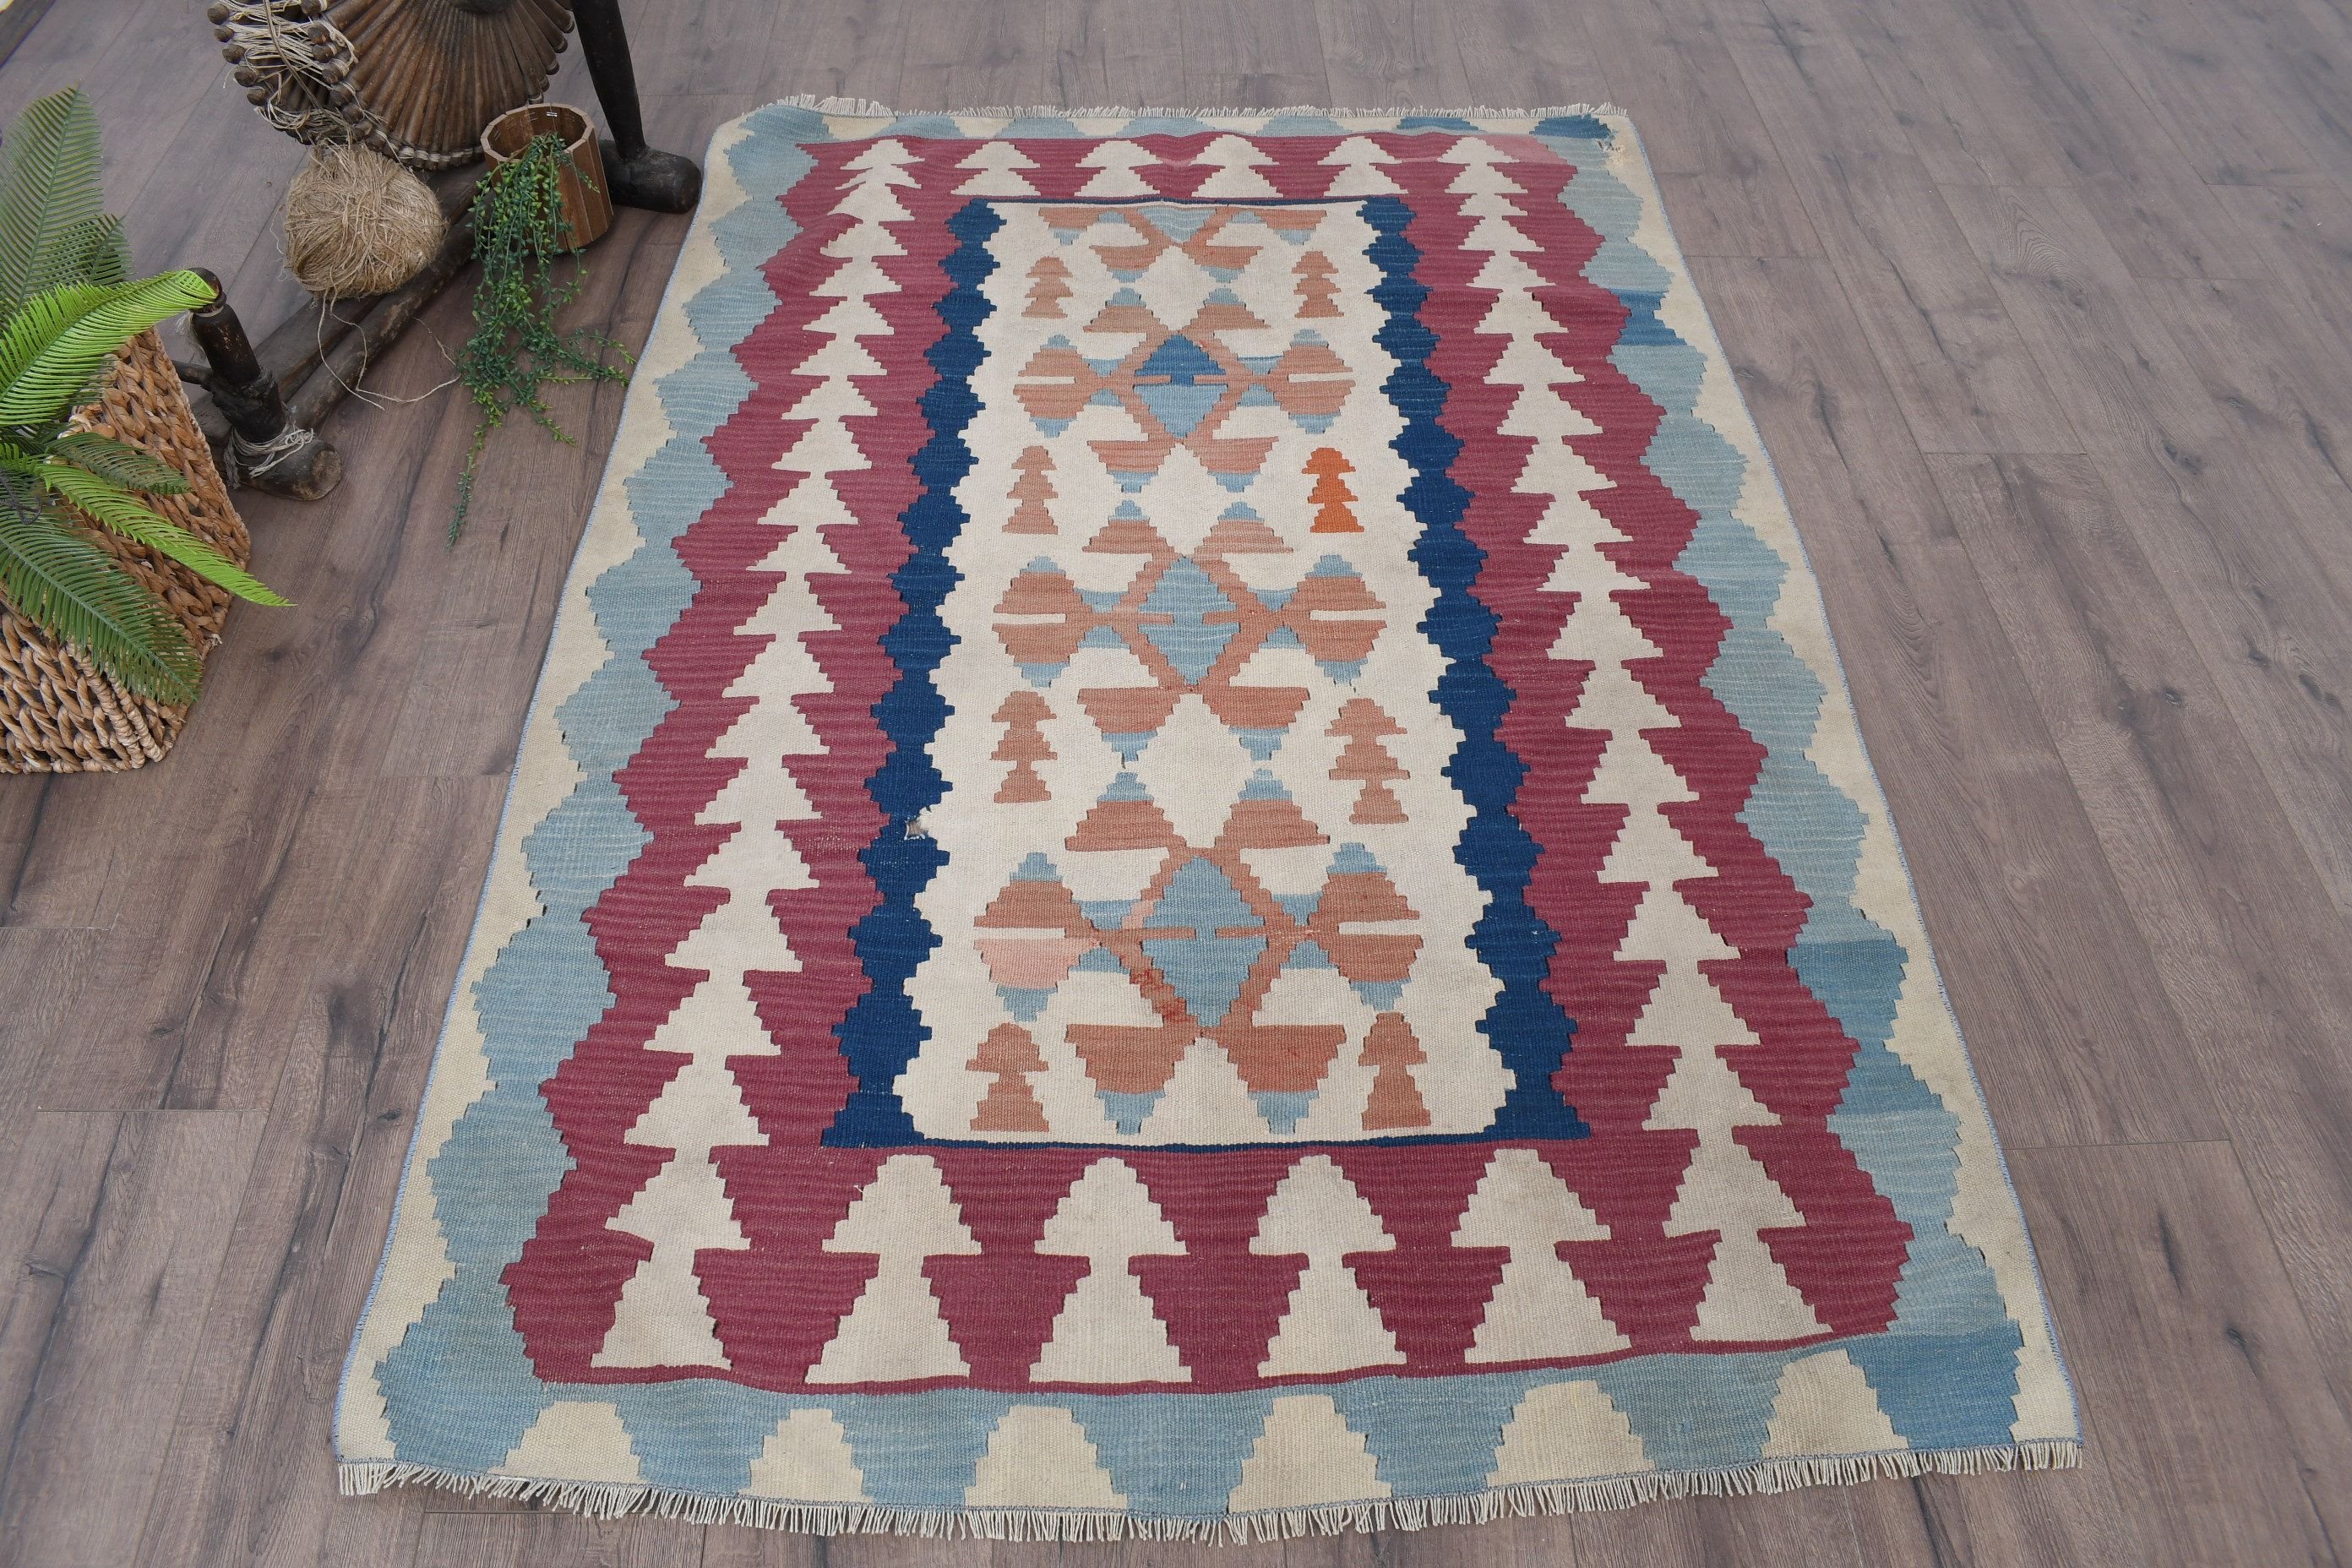 Entry Rug, Vintage Rugs, 3.9x5.8 ft Accent Rug, Kilim, Anatolian Rugs, Antique Rugs, Turkish Rugs, Beige Kitchen Rugs, Rugs for Kitchen